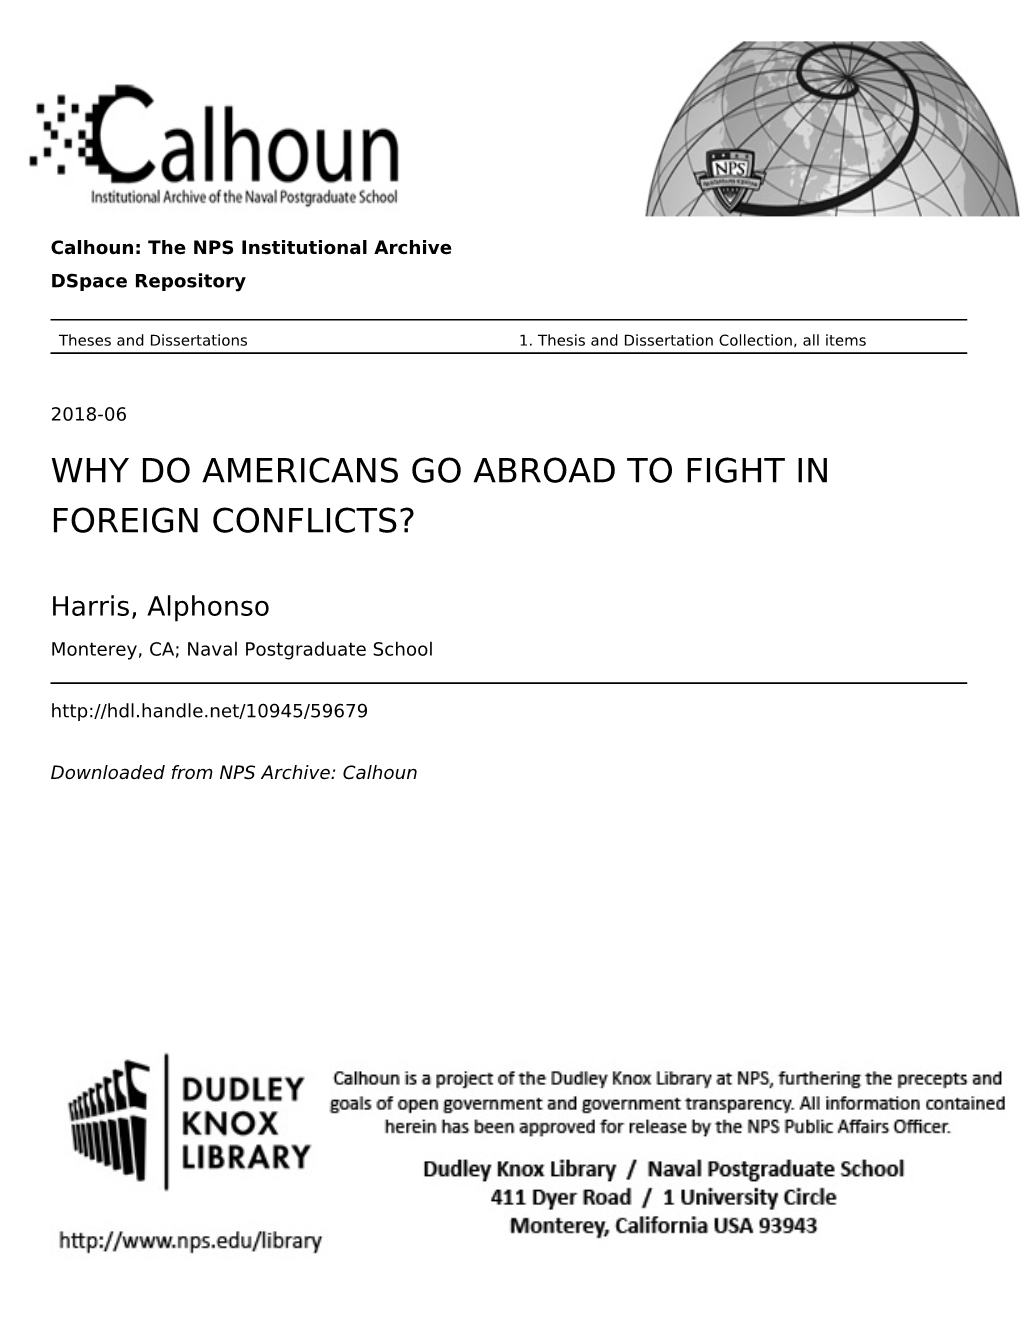 Why Do Americans Go Abroad to Fight in Foreign Conflicts?